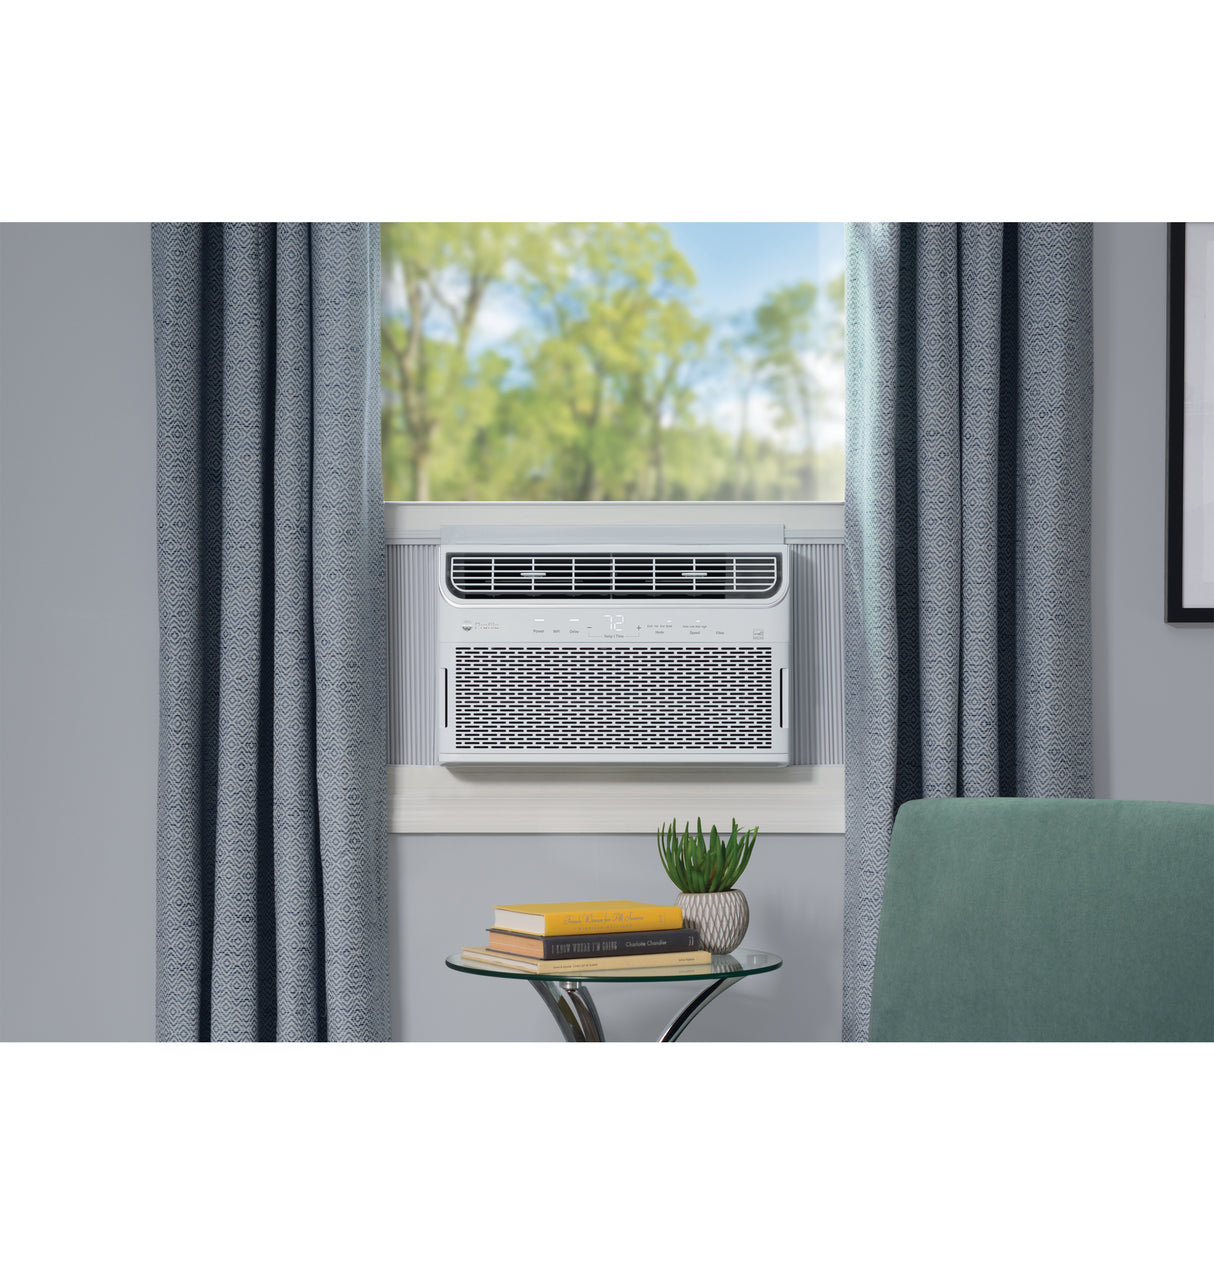 GE Profile(TM) ENERGY STAR(R) 13,500 BTU Inverter Smart Ultra Quiet Window Air Conditioner for Large Rooms up to 700 sq. ft. - (AHTR14AC)